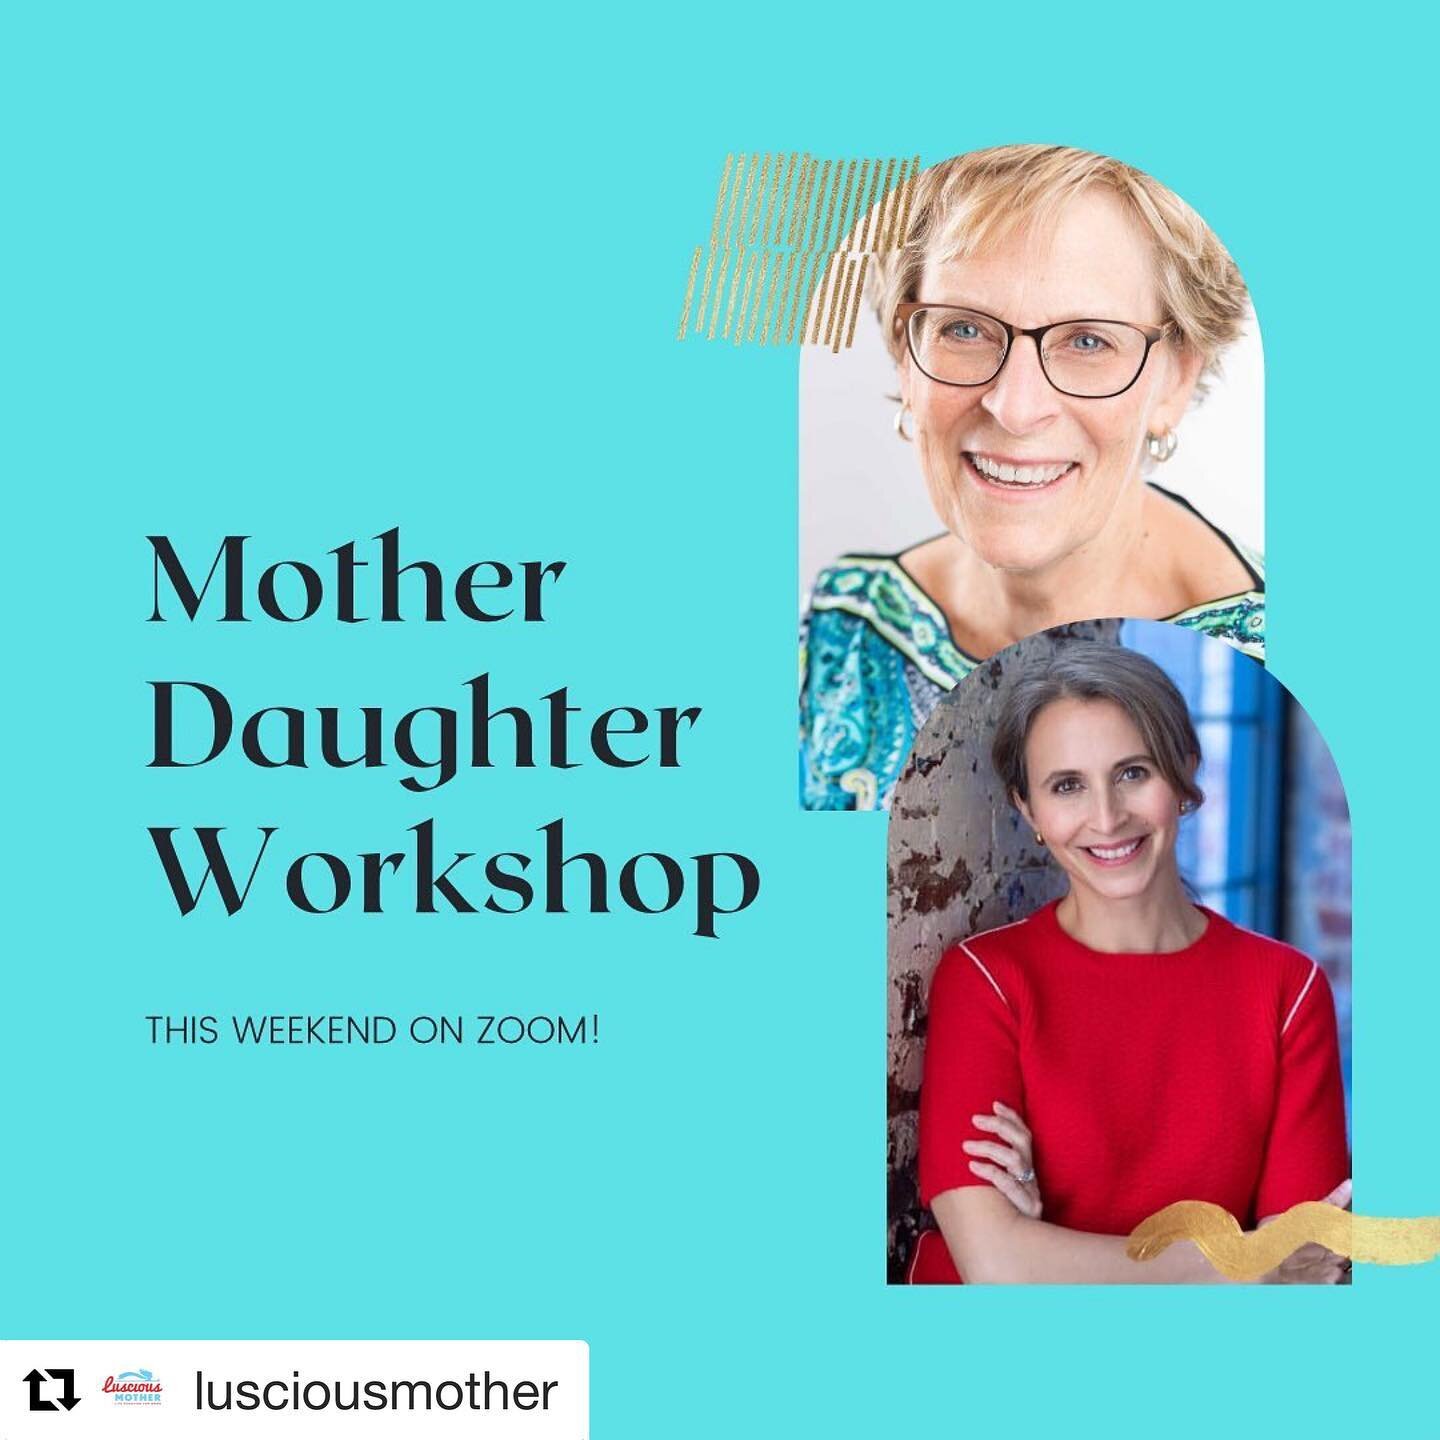 We at @lusciousmother are hosting a beautiful workshop this weekend on forgiveness and healing of the mother/daughter relationship.

Come alone or bring your mom...while a relationship happens between two people, reinvention is possible when only one